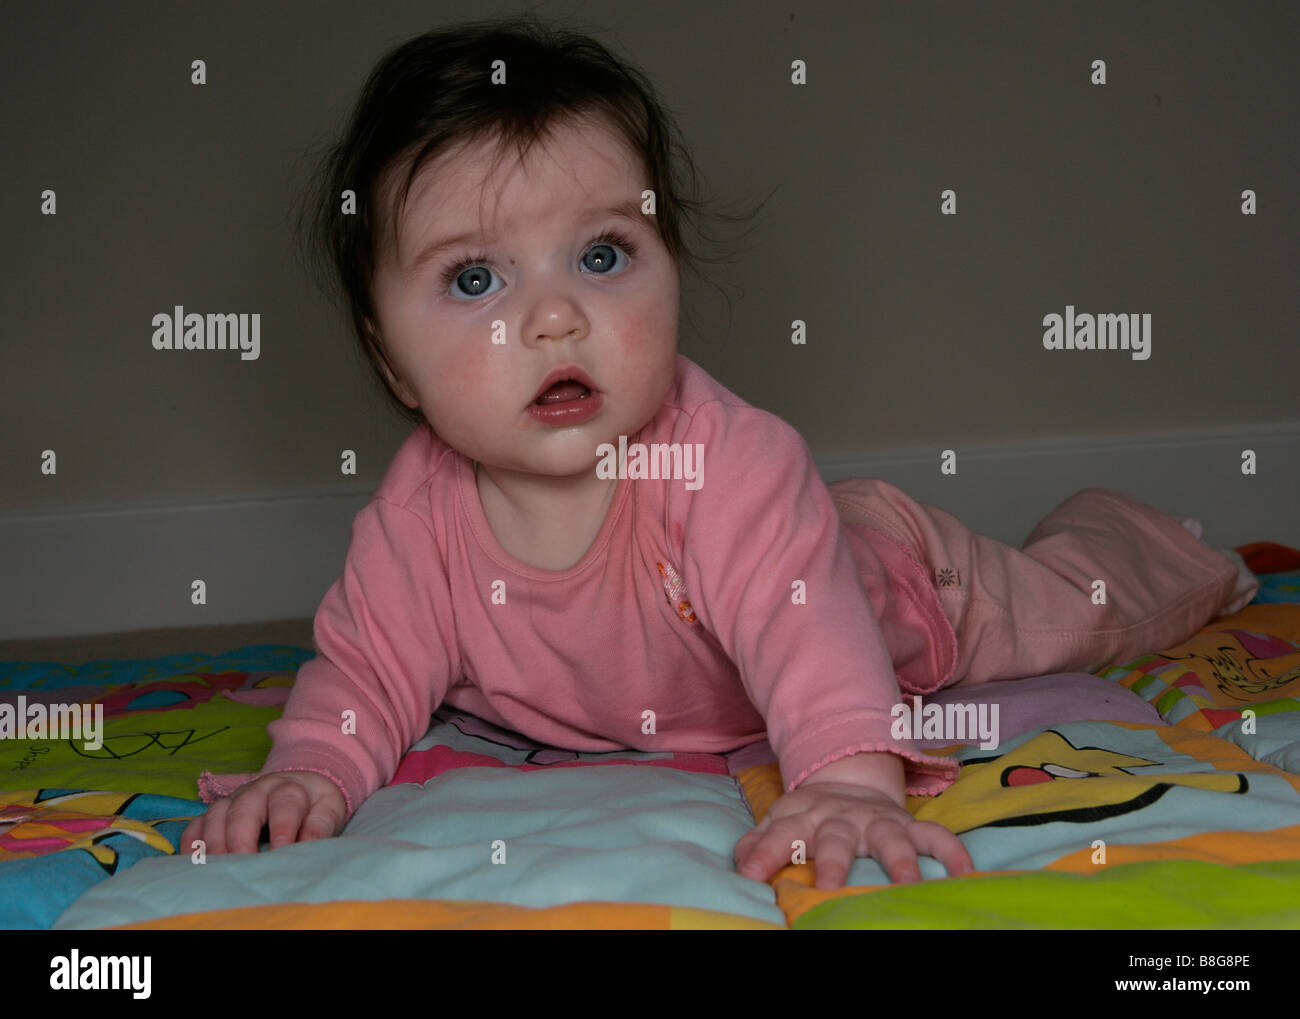 A baby girl learning to crawl Stock Photo